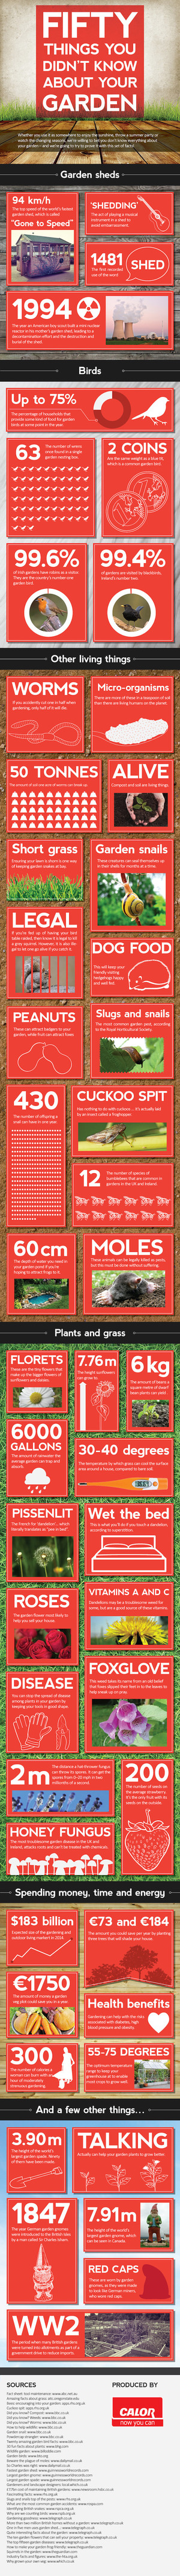 50-facts-about-your-garden-infographic